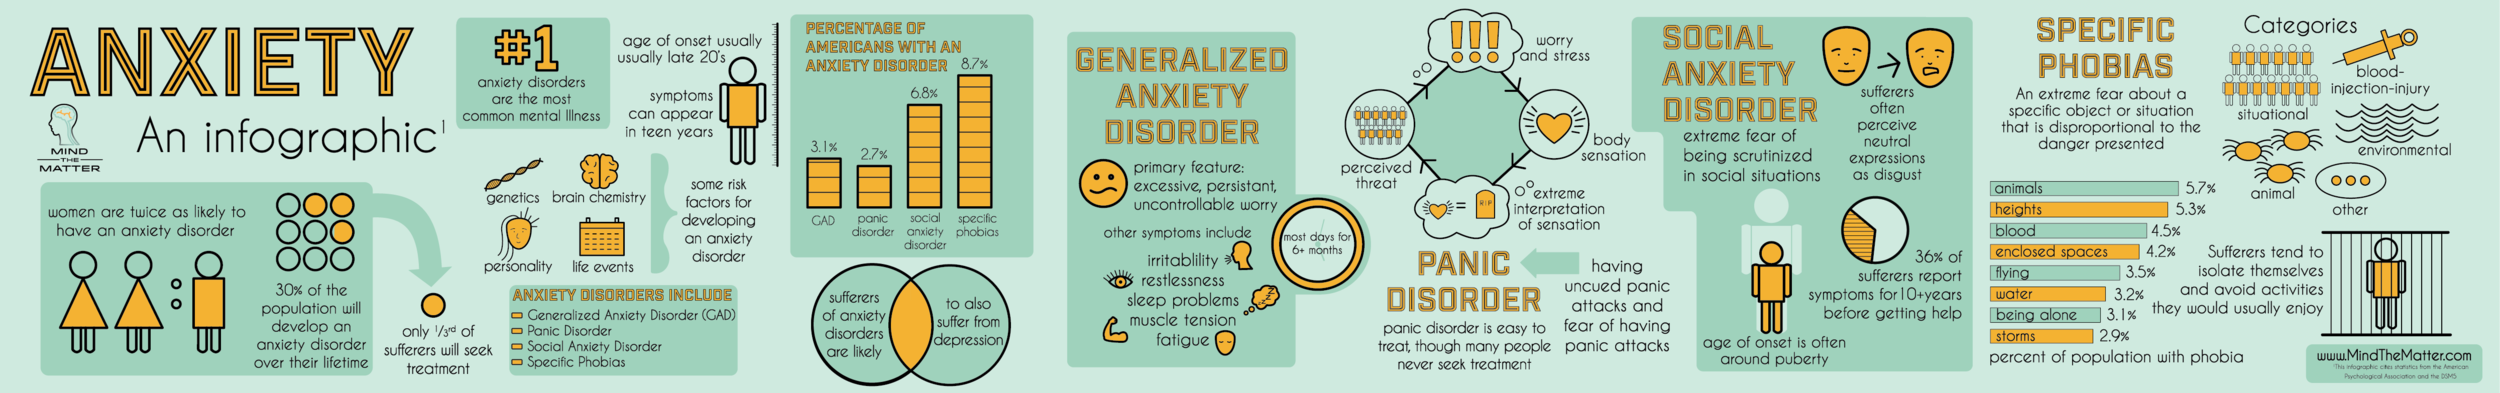 anxiety infographic print_2019-01.png